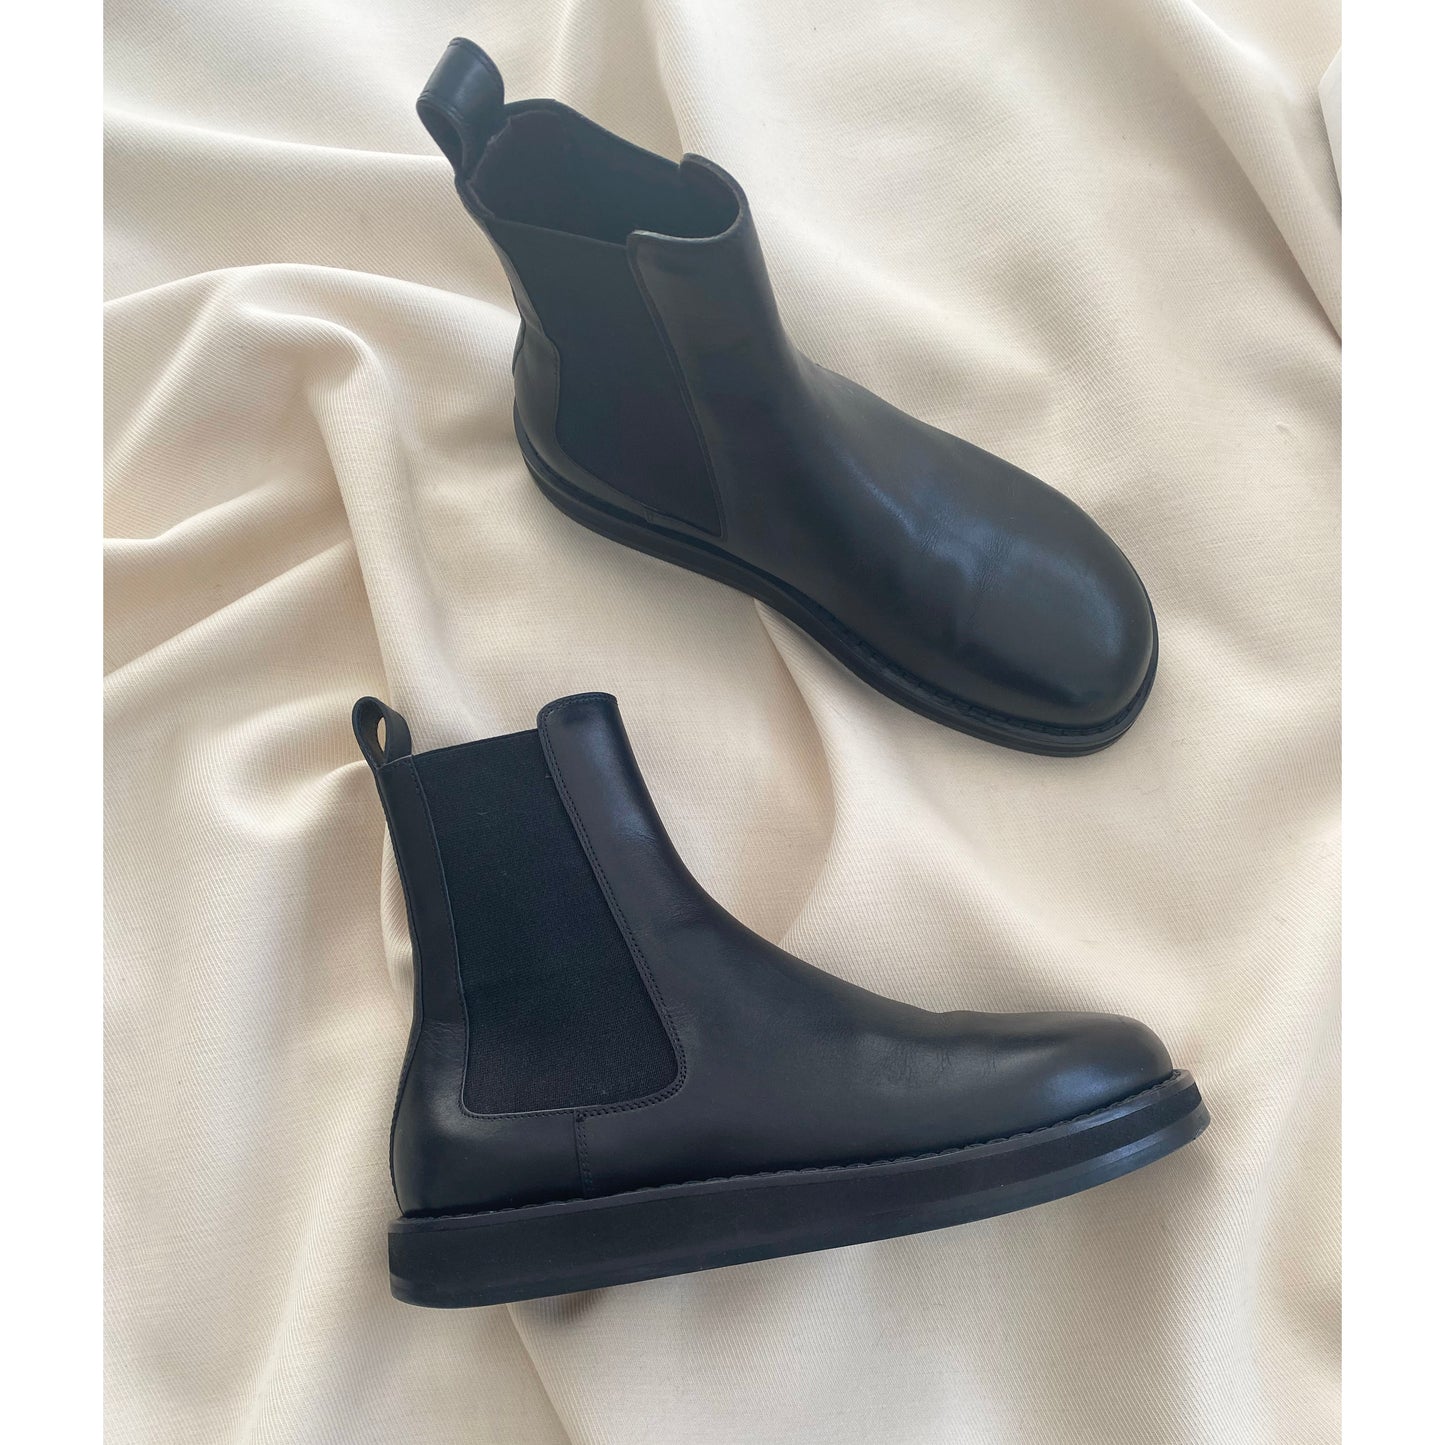 The Row Gaia Boot in Black, size 39